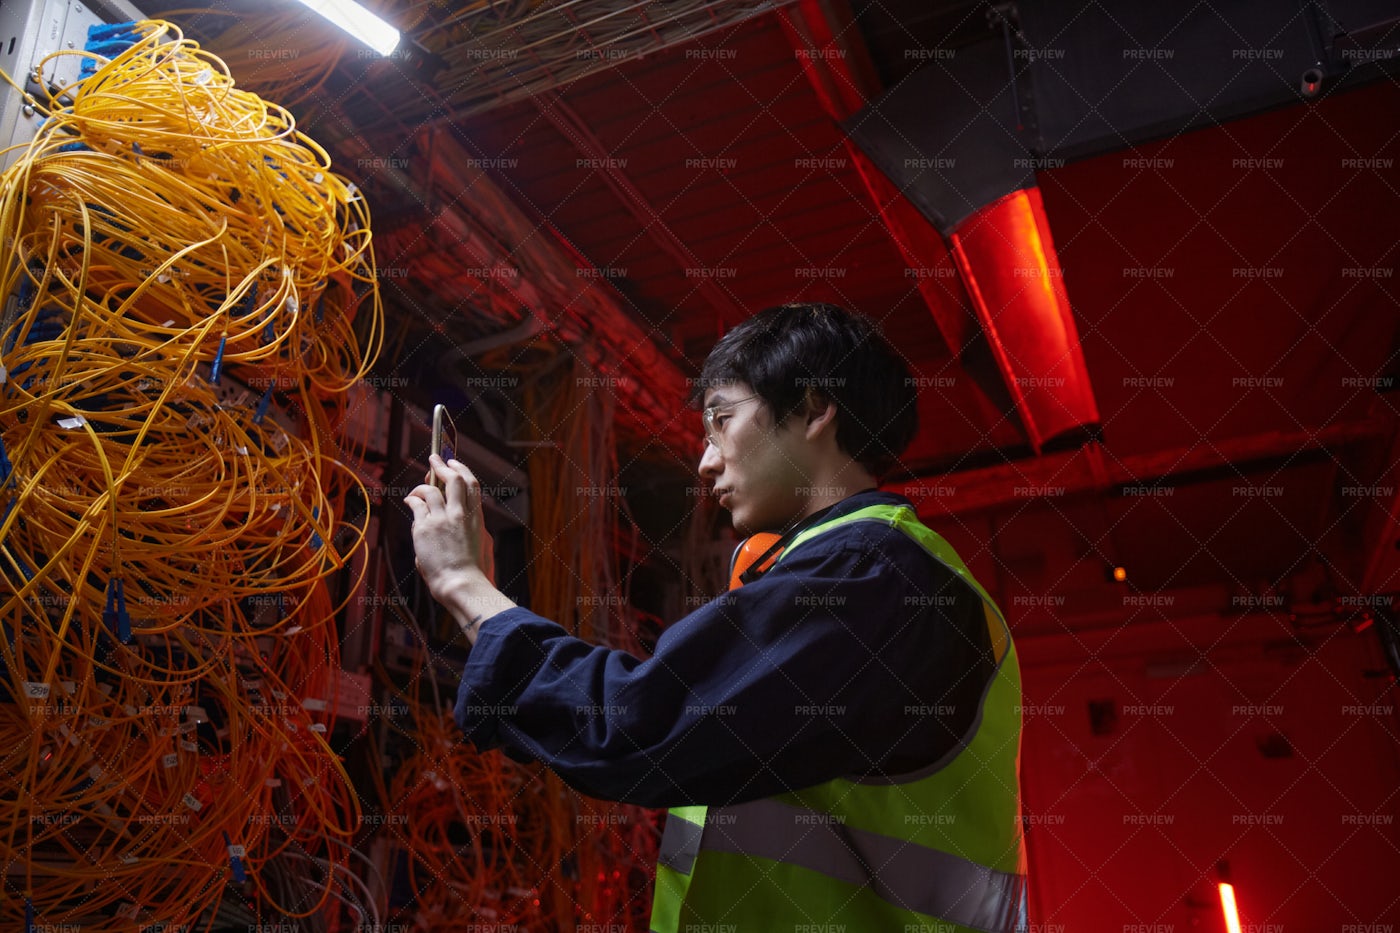 Inspecting The Server Cables: Stock Photos